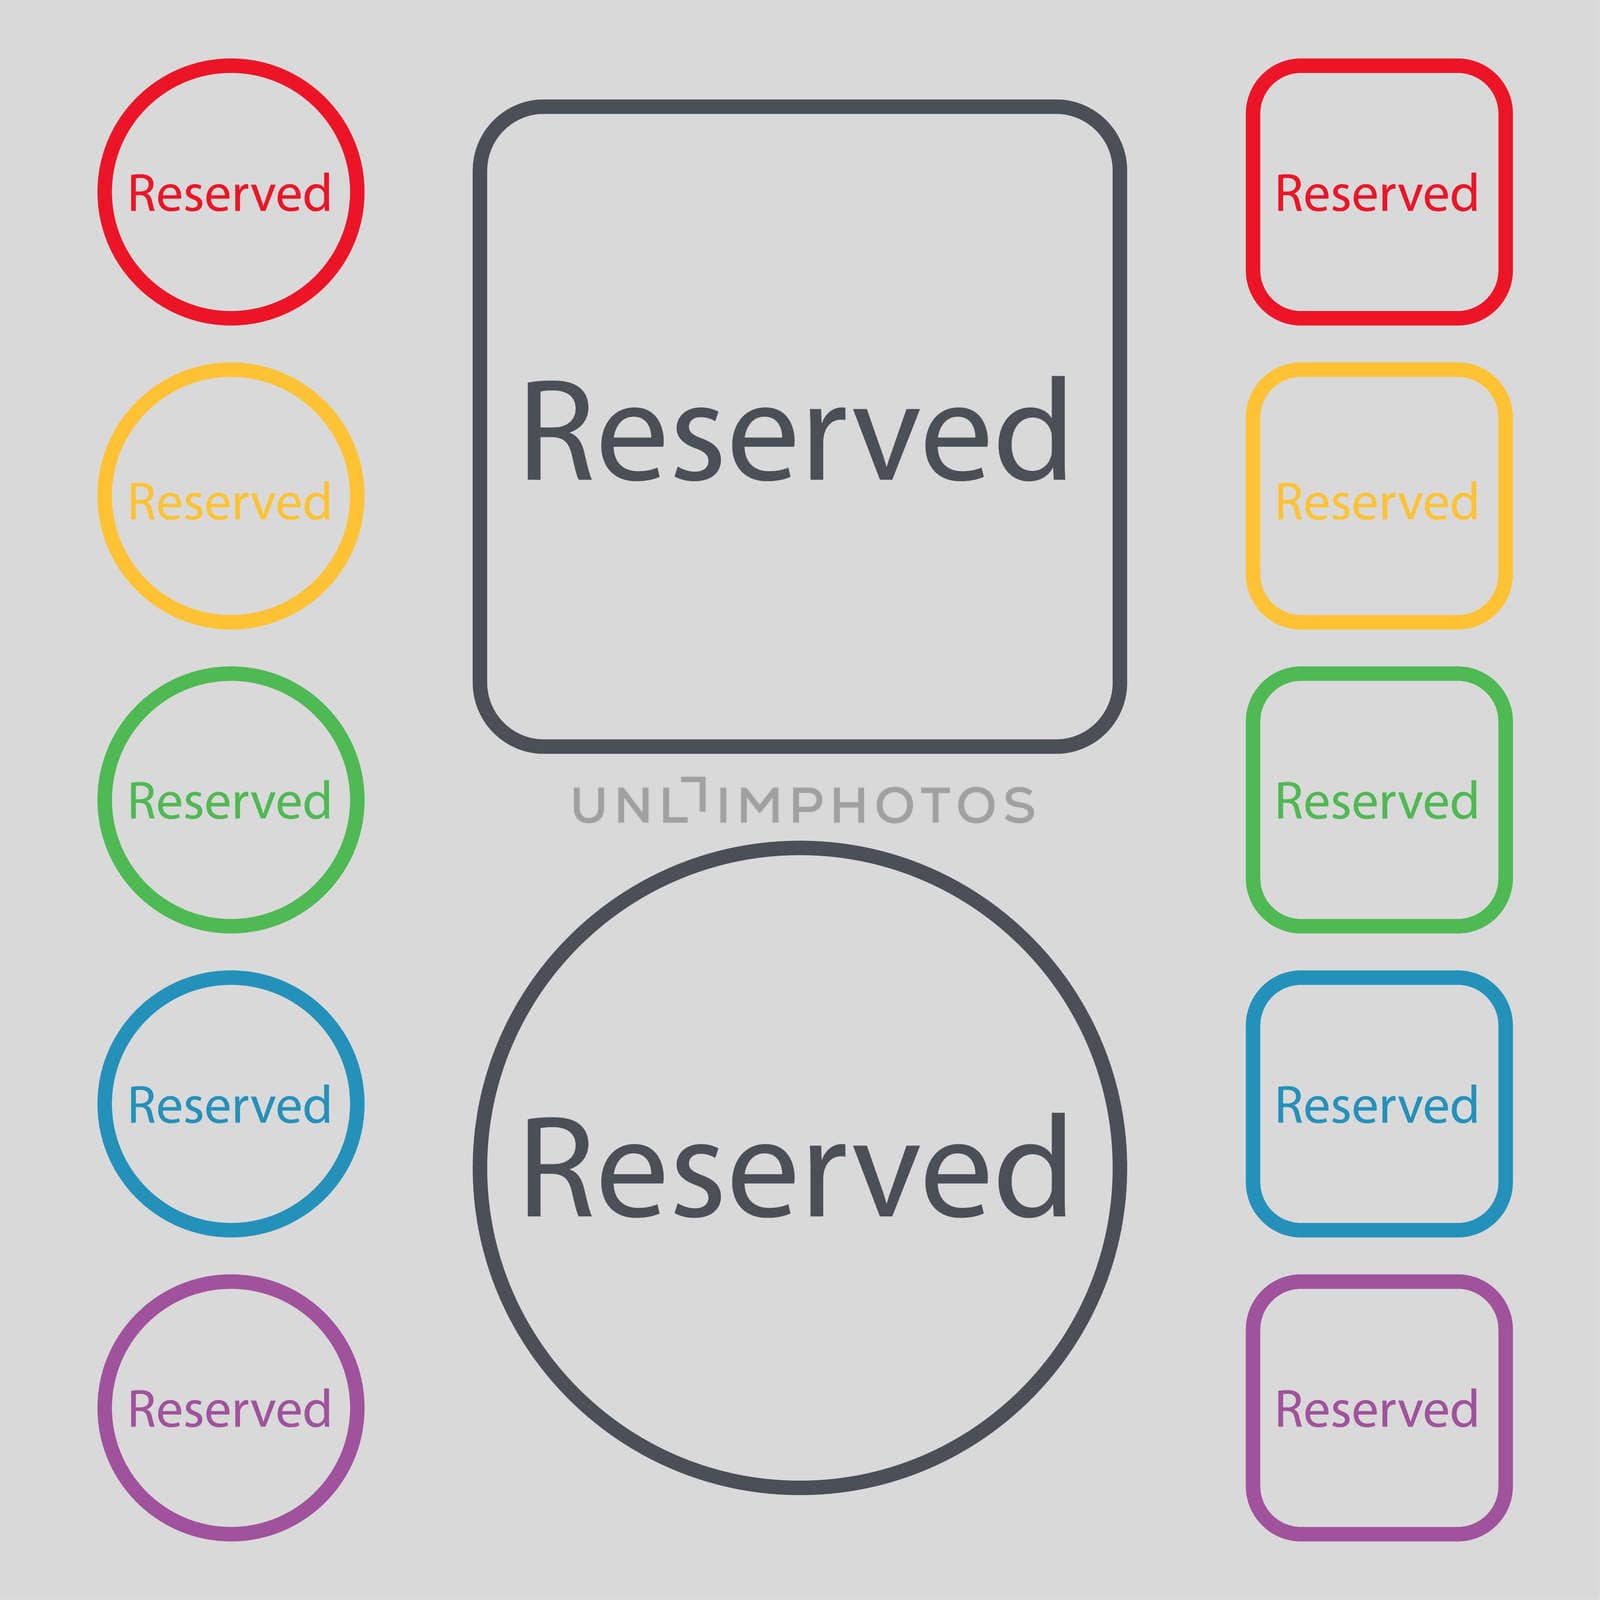 Reserved sign icon. Set of colored buttons. illustration